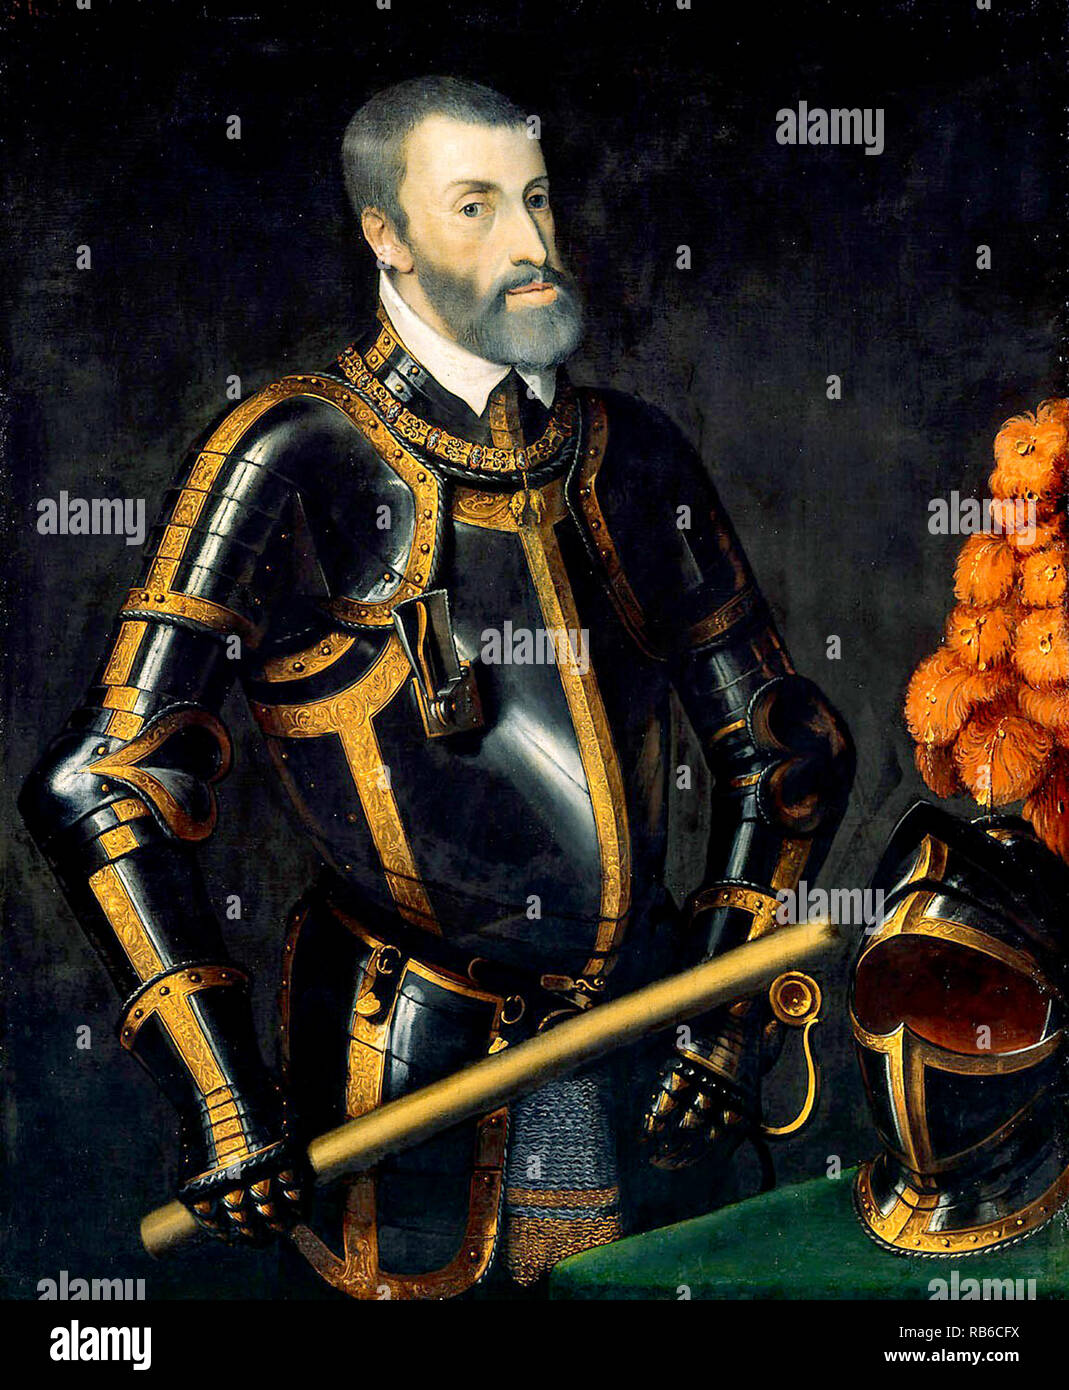 Karl V (Don Carlos I of Spain), ruler of the Holy Roman Empire Charles V (1500 – 1558) ruler of both the Holy Roman Empire from 1519 and the Spanish Empire (as Charles I of Spain) from 1516 Stock Photo